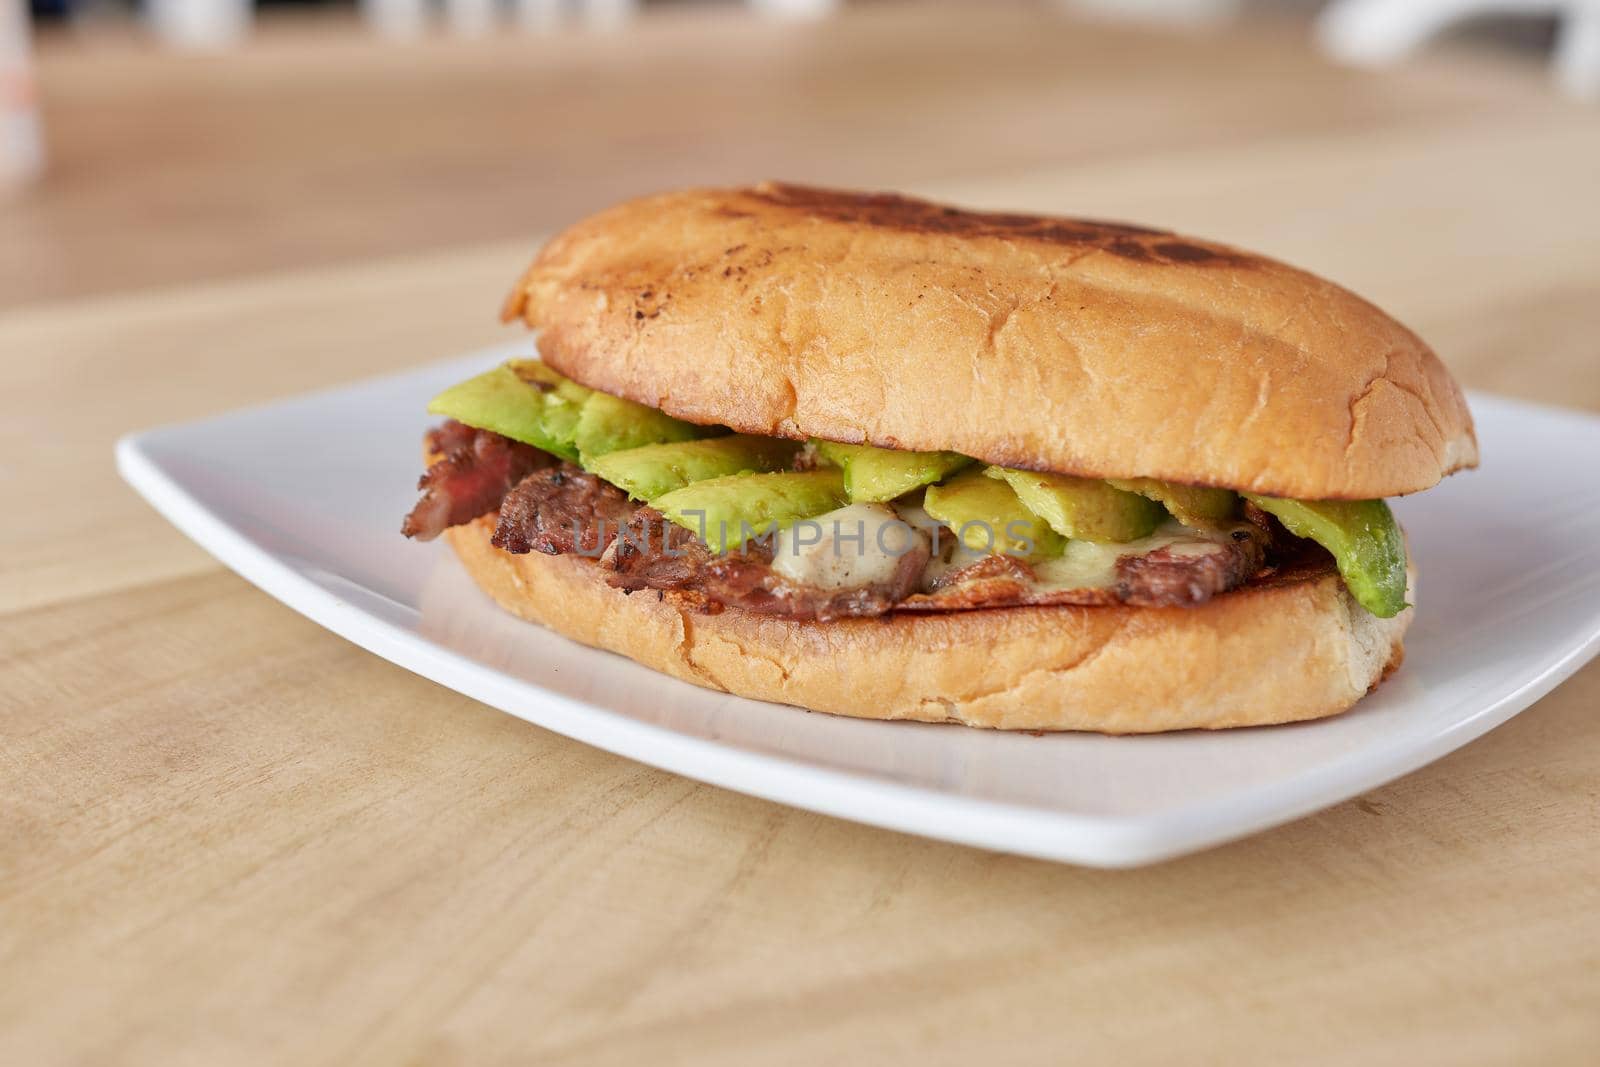 picture of delicious sandwich or Torta with meat, avocado and cheese on wooden table.. typical mexican food.